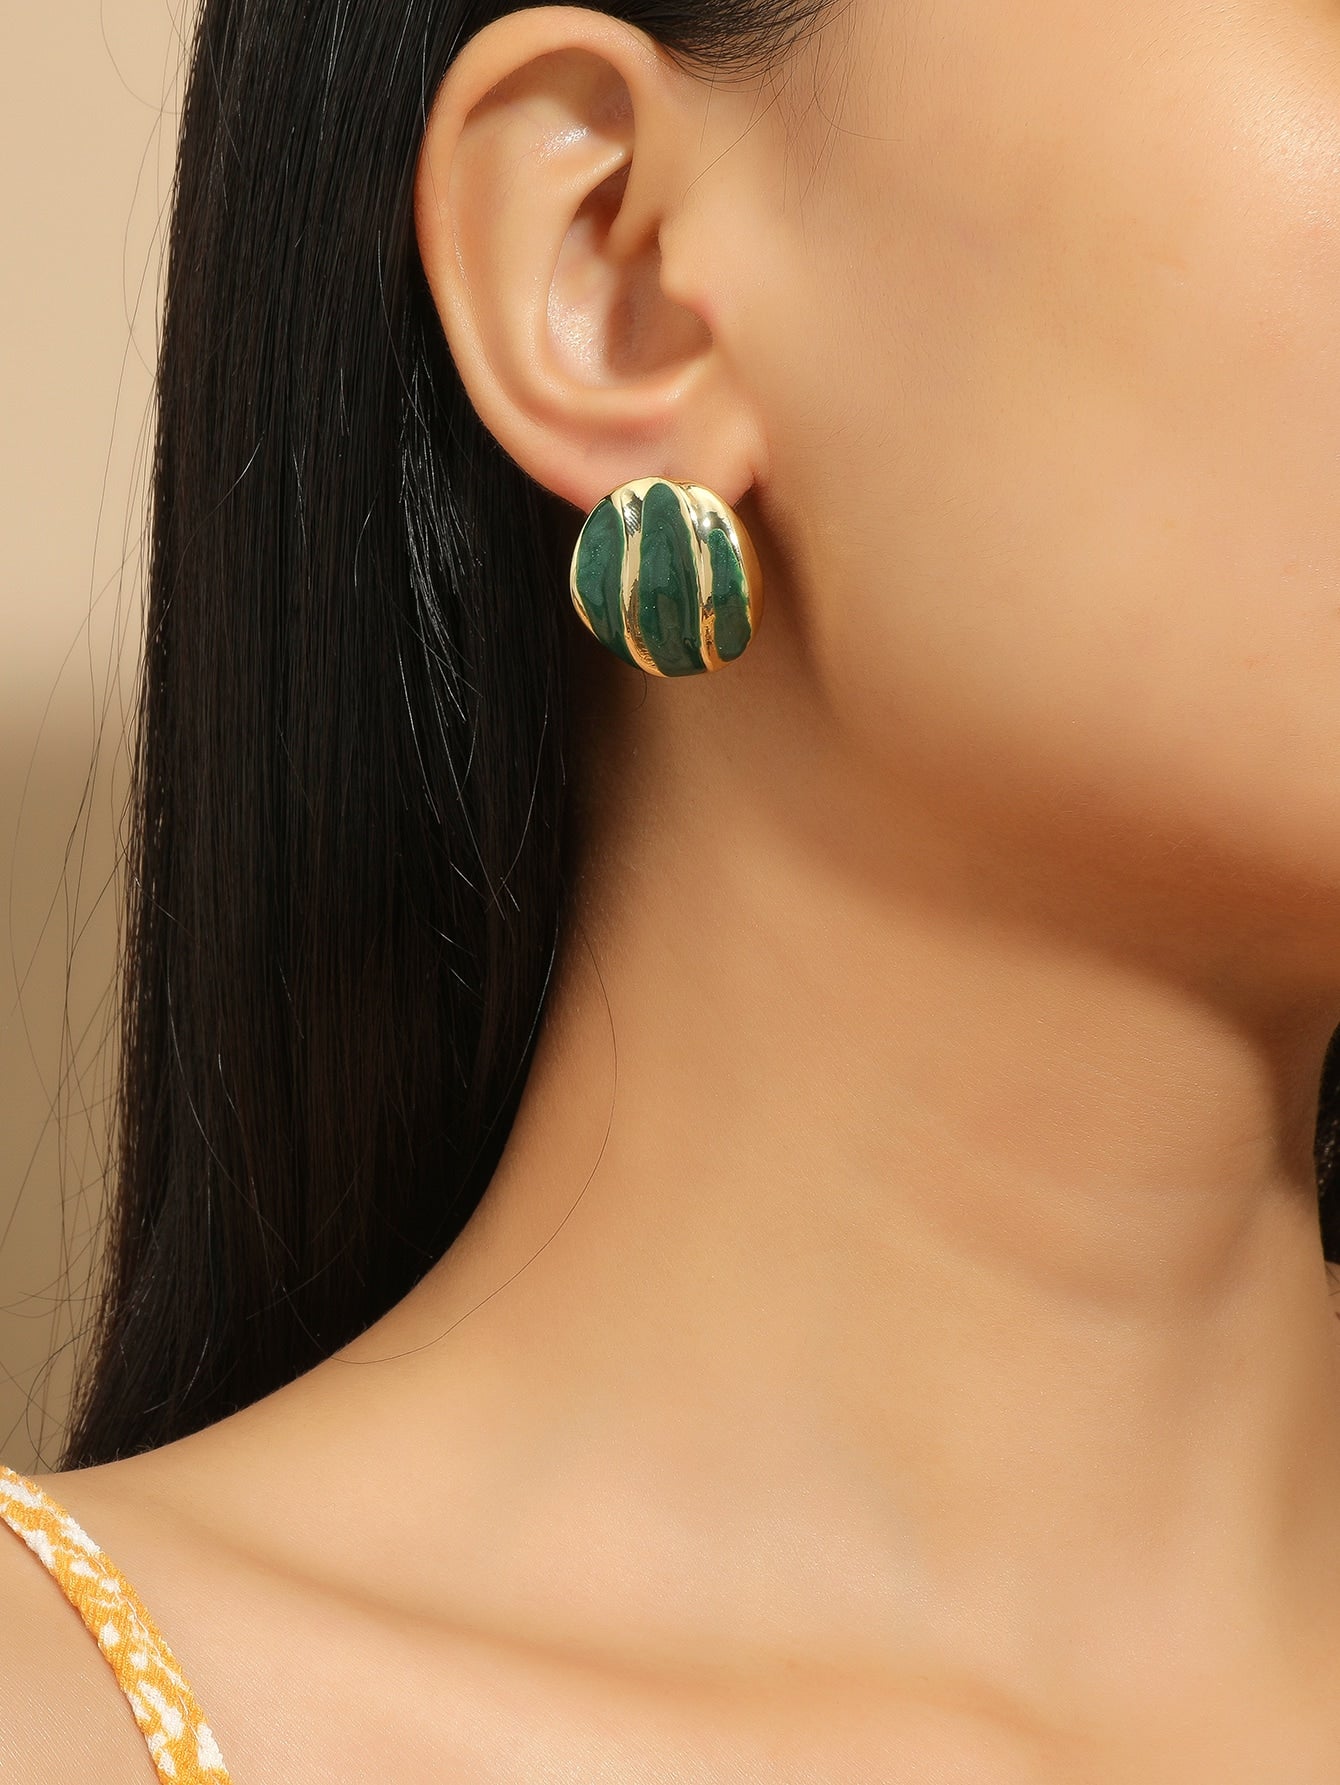 Arzonai Summer Small Fresh Round  Green Earrings for women and Girls and women